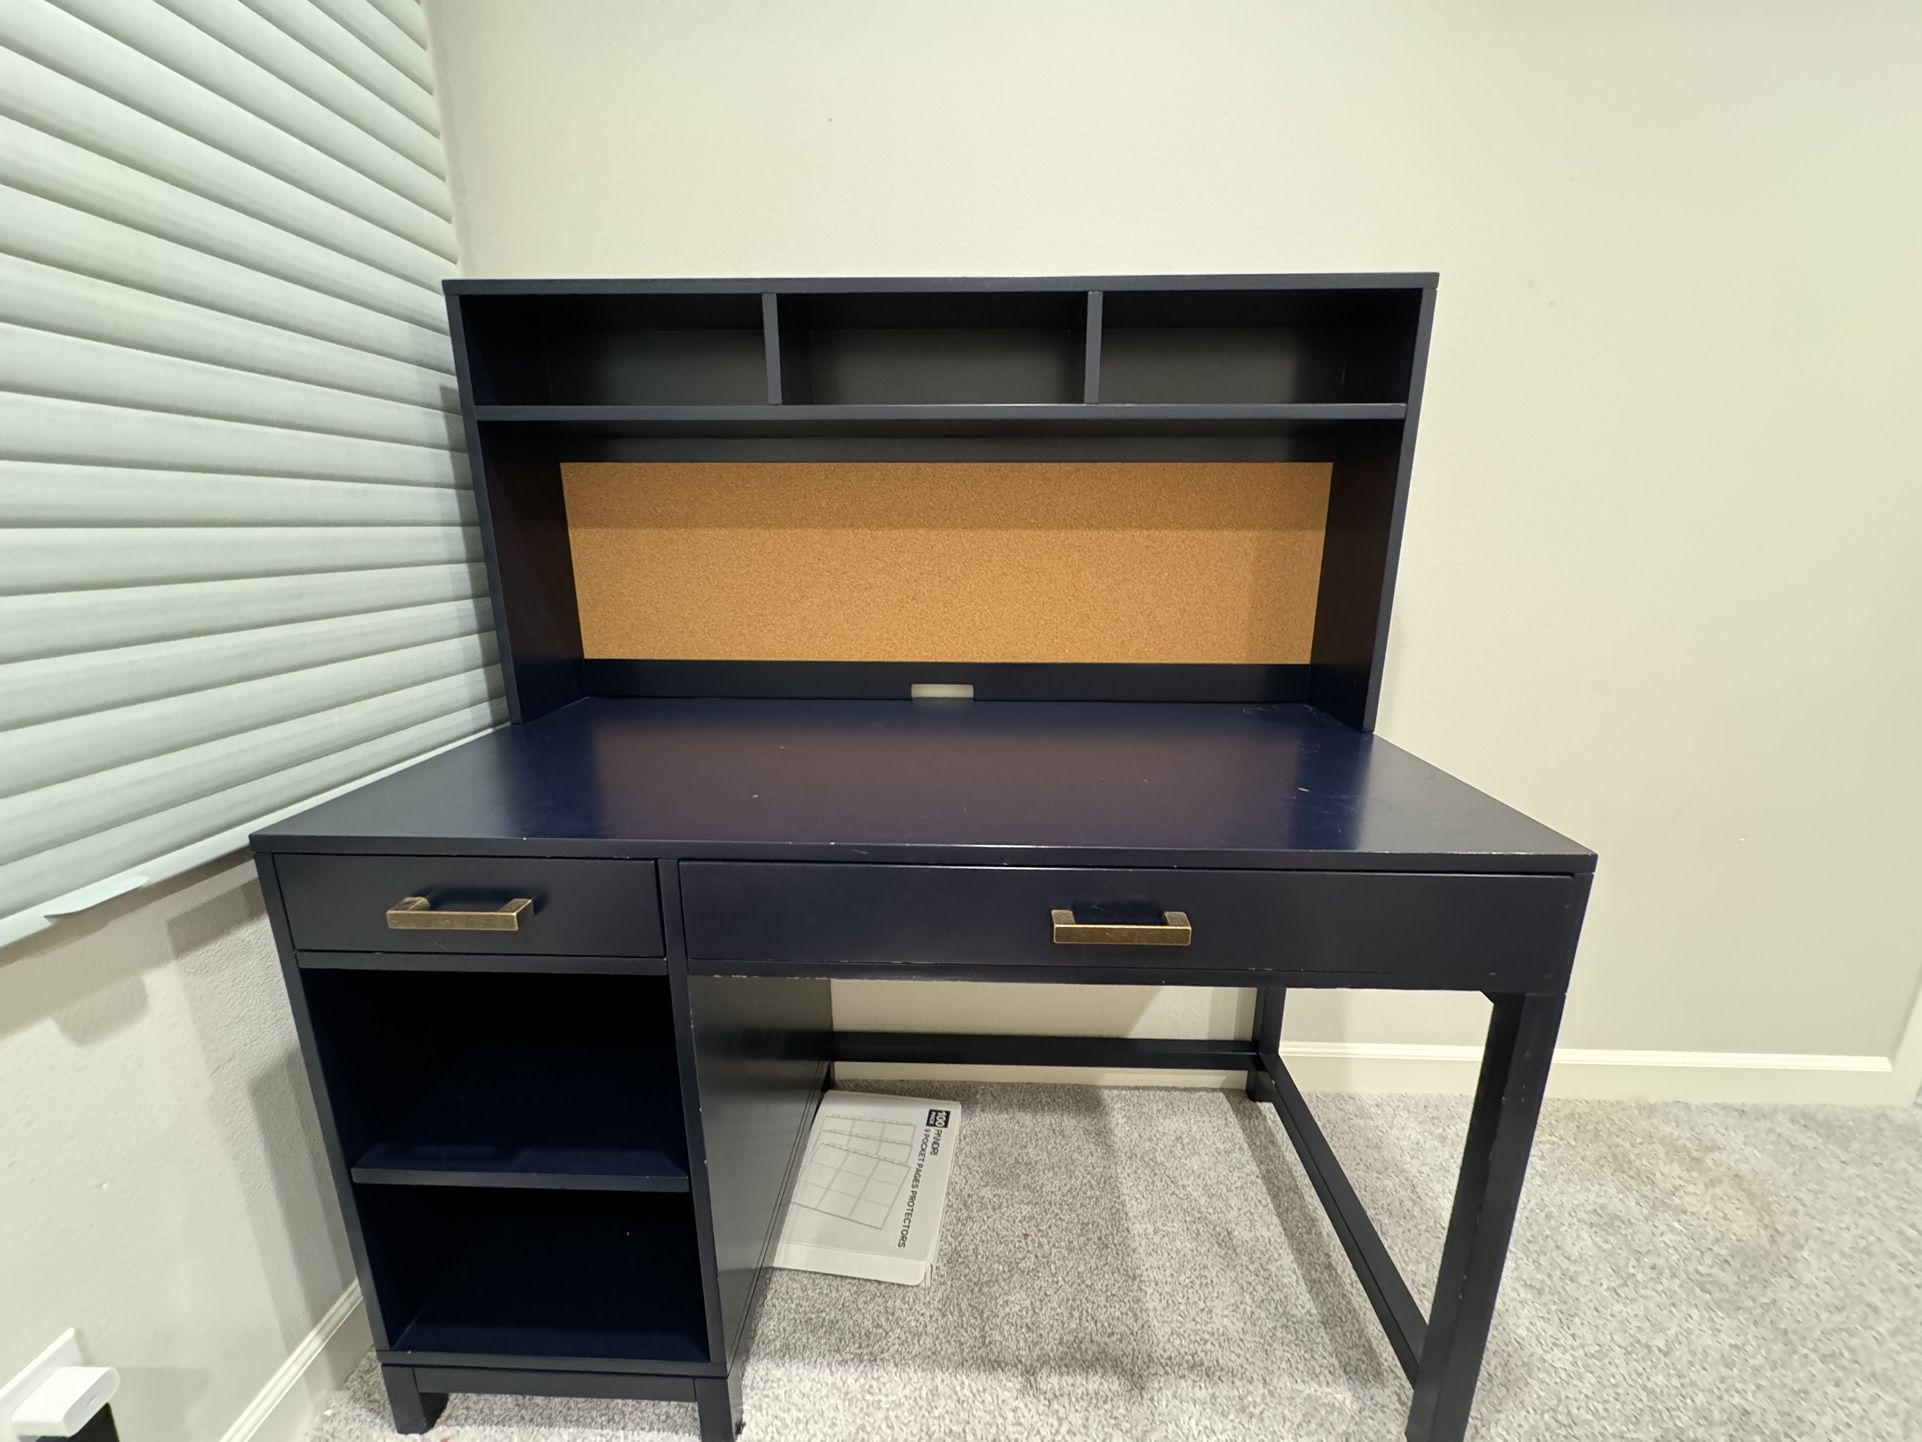 Crate And Barrel Kids Parke Navy Blue Wood Desk And Hutch